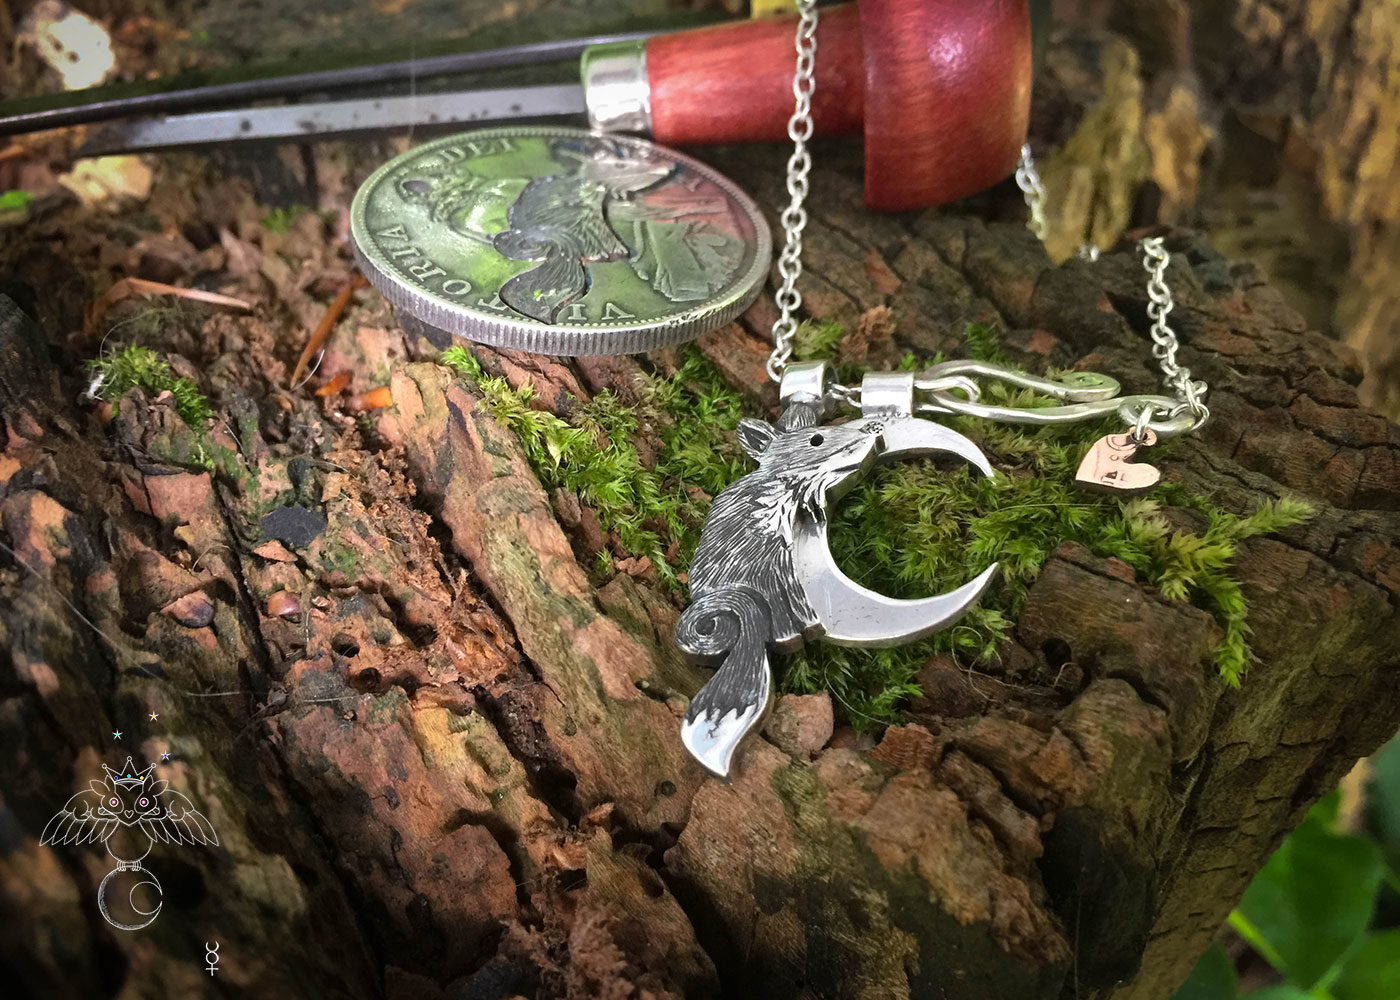 Fox jewellery - handmade using traditional tools and techniques reusing 100 year old sterling silver coins